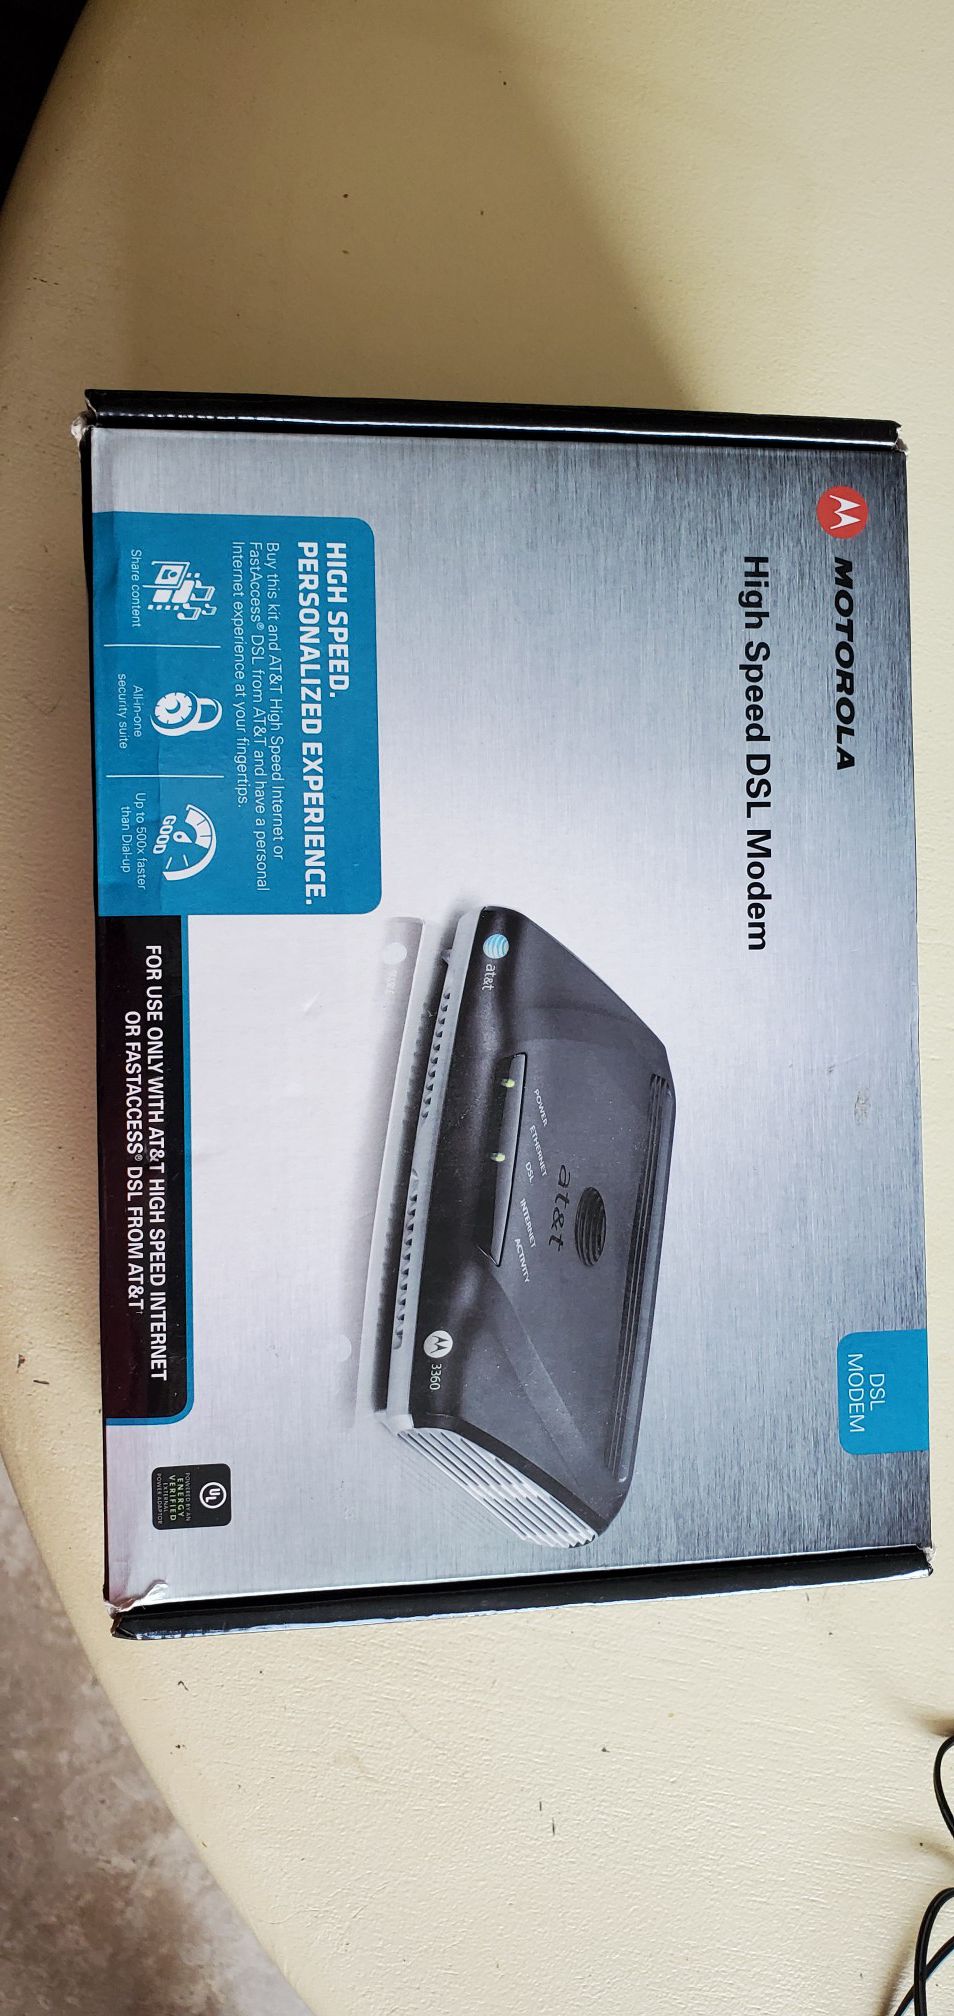 MOTOROLA 3360 HIGH SPEED DSL MODEM (FOR USE ONLY WITH AT&T INTERNET)